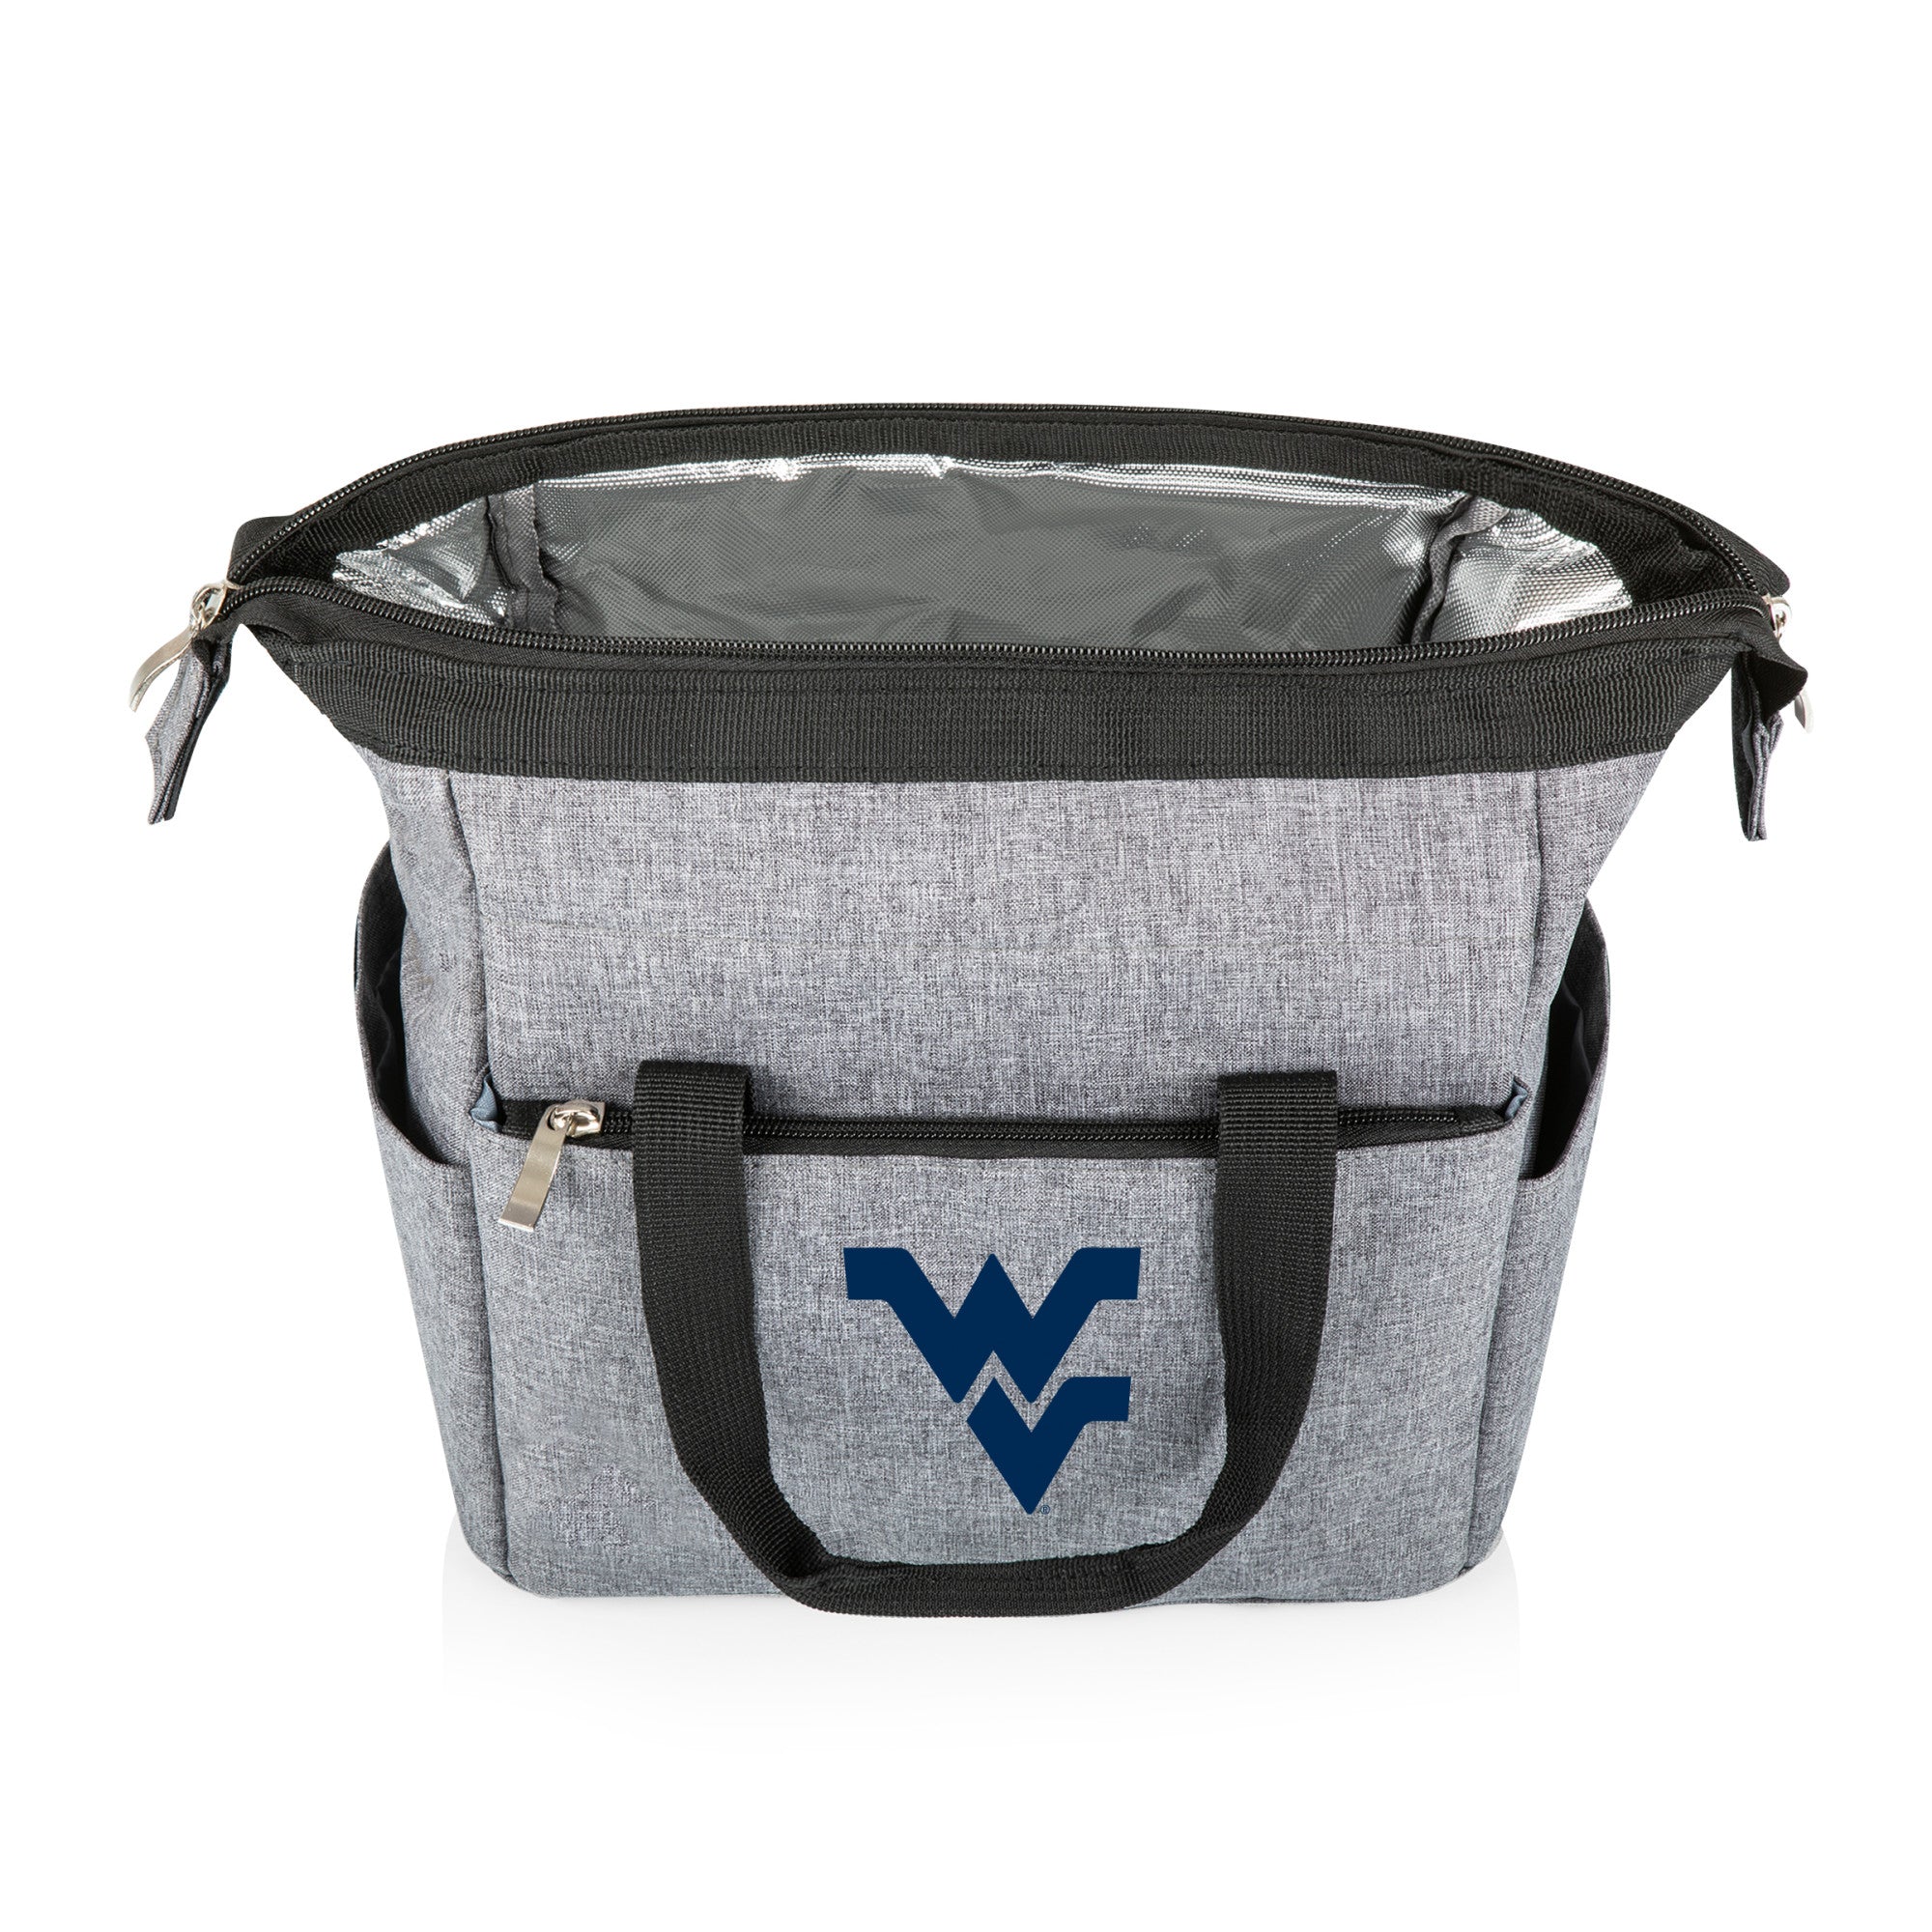 West Virginia Mountaineers - On The Go Lunch Bag Cooler